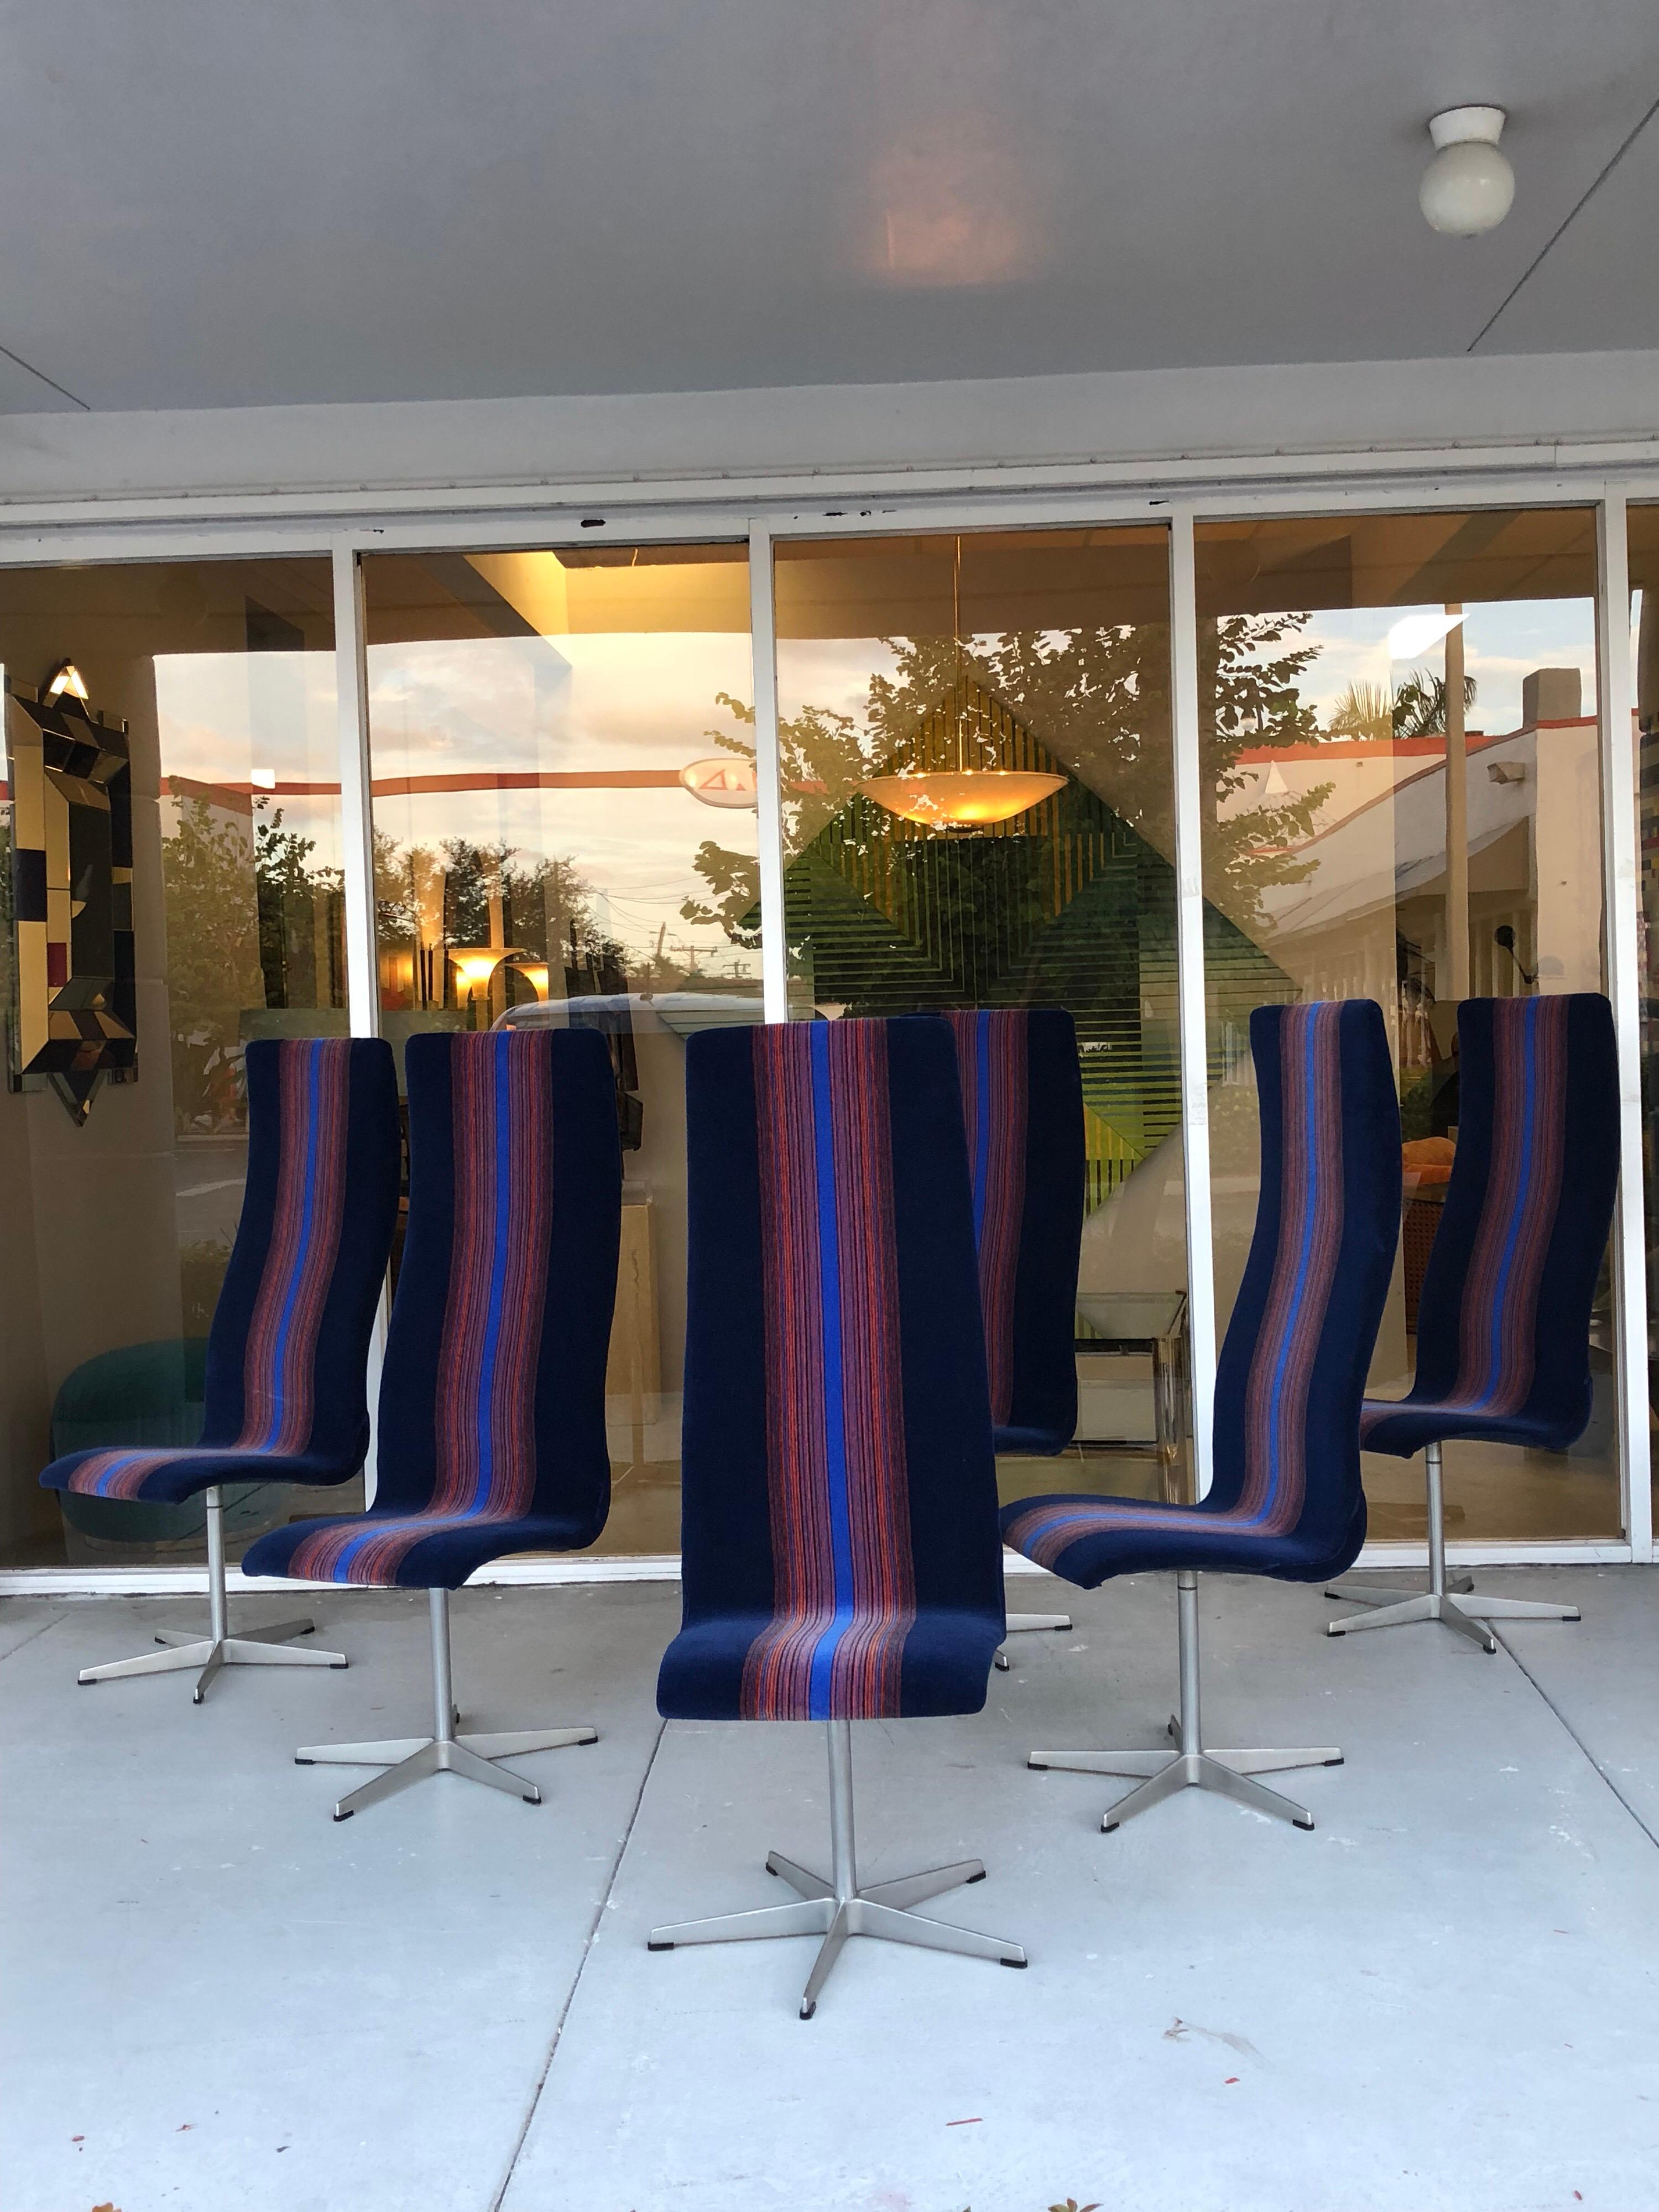 A set of six Oxford chairs. A seemingly simple design becomes the epitome of modern elegance in the hands of Arne Jacobsen. The upholstery is blue and orange mohair, possibly a fabric design by Verner Panton.